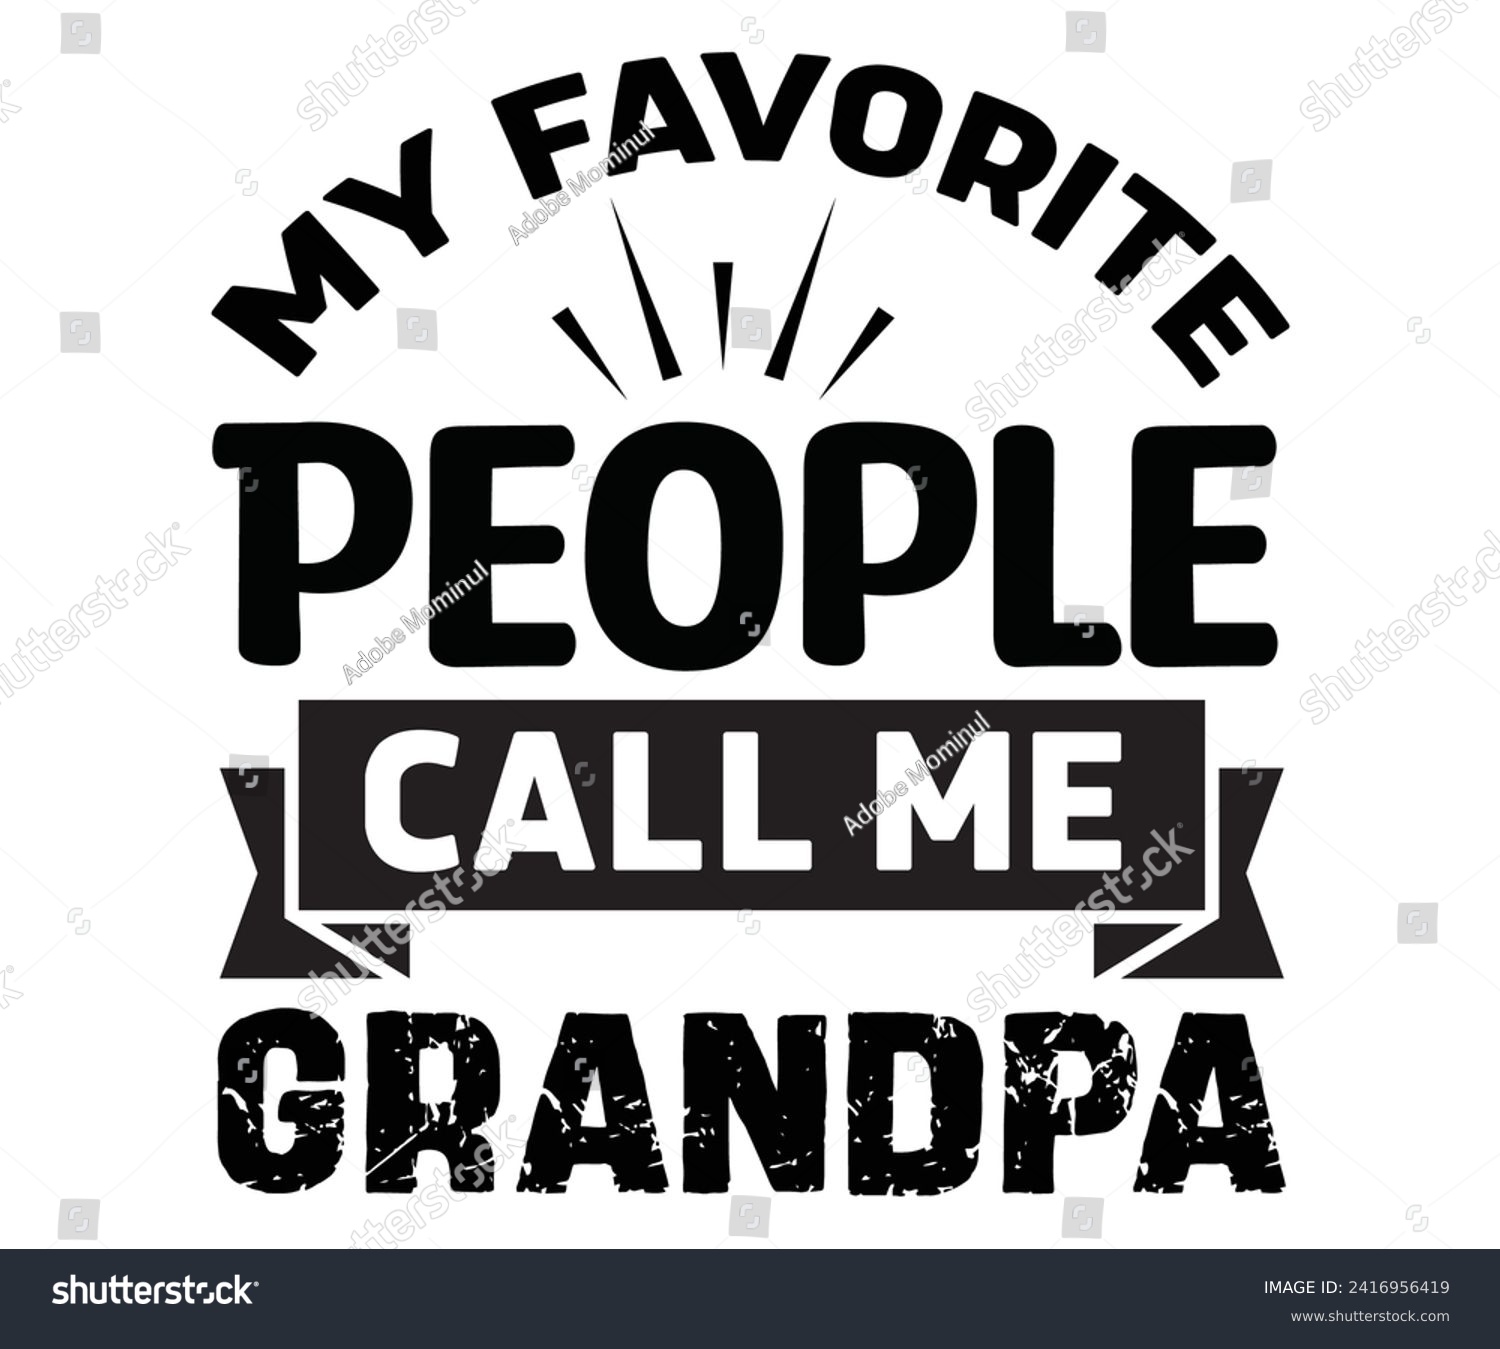 SVG of My Favorite People Call Me Grandpa, Father's Day Svg,Papa svg,Grandpa Svg,Father's Day Saying Qoutes,Dad Svg,Funny Father, Gift For Dad Svg,Daddy Svg,Family Svg,T shirt Design,Svg Cut File,Typography svg